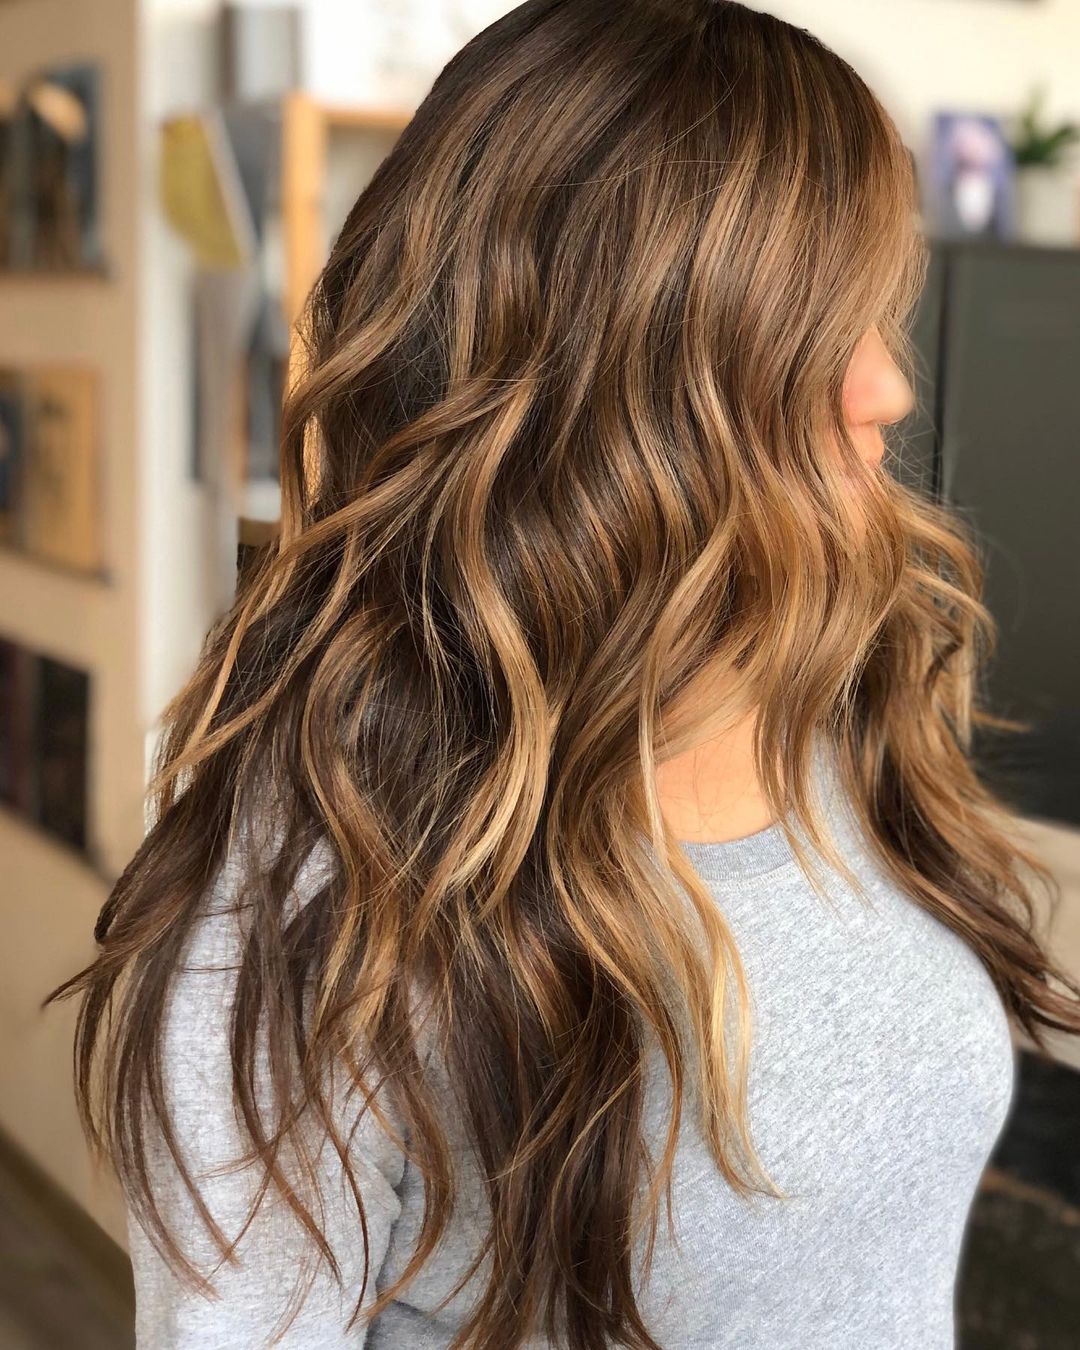 Loose Waves Created with One and Half Inch Curling Iron